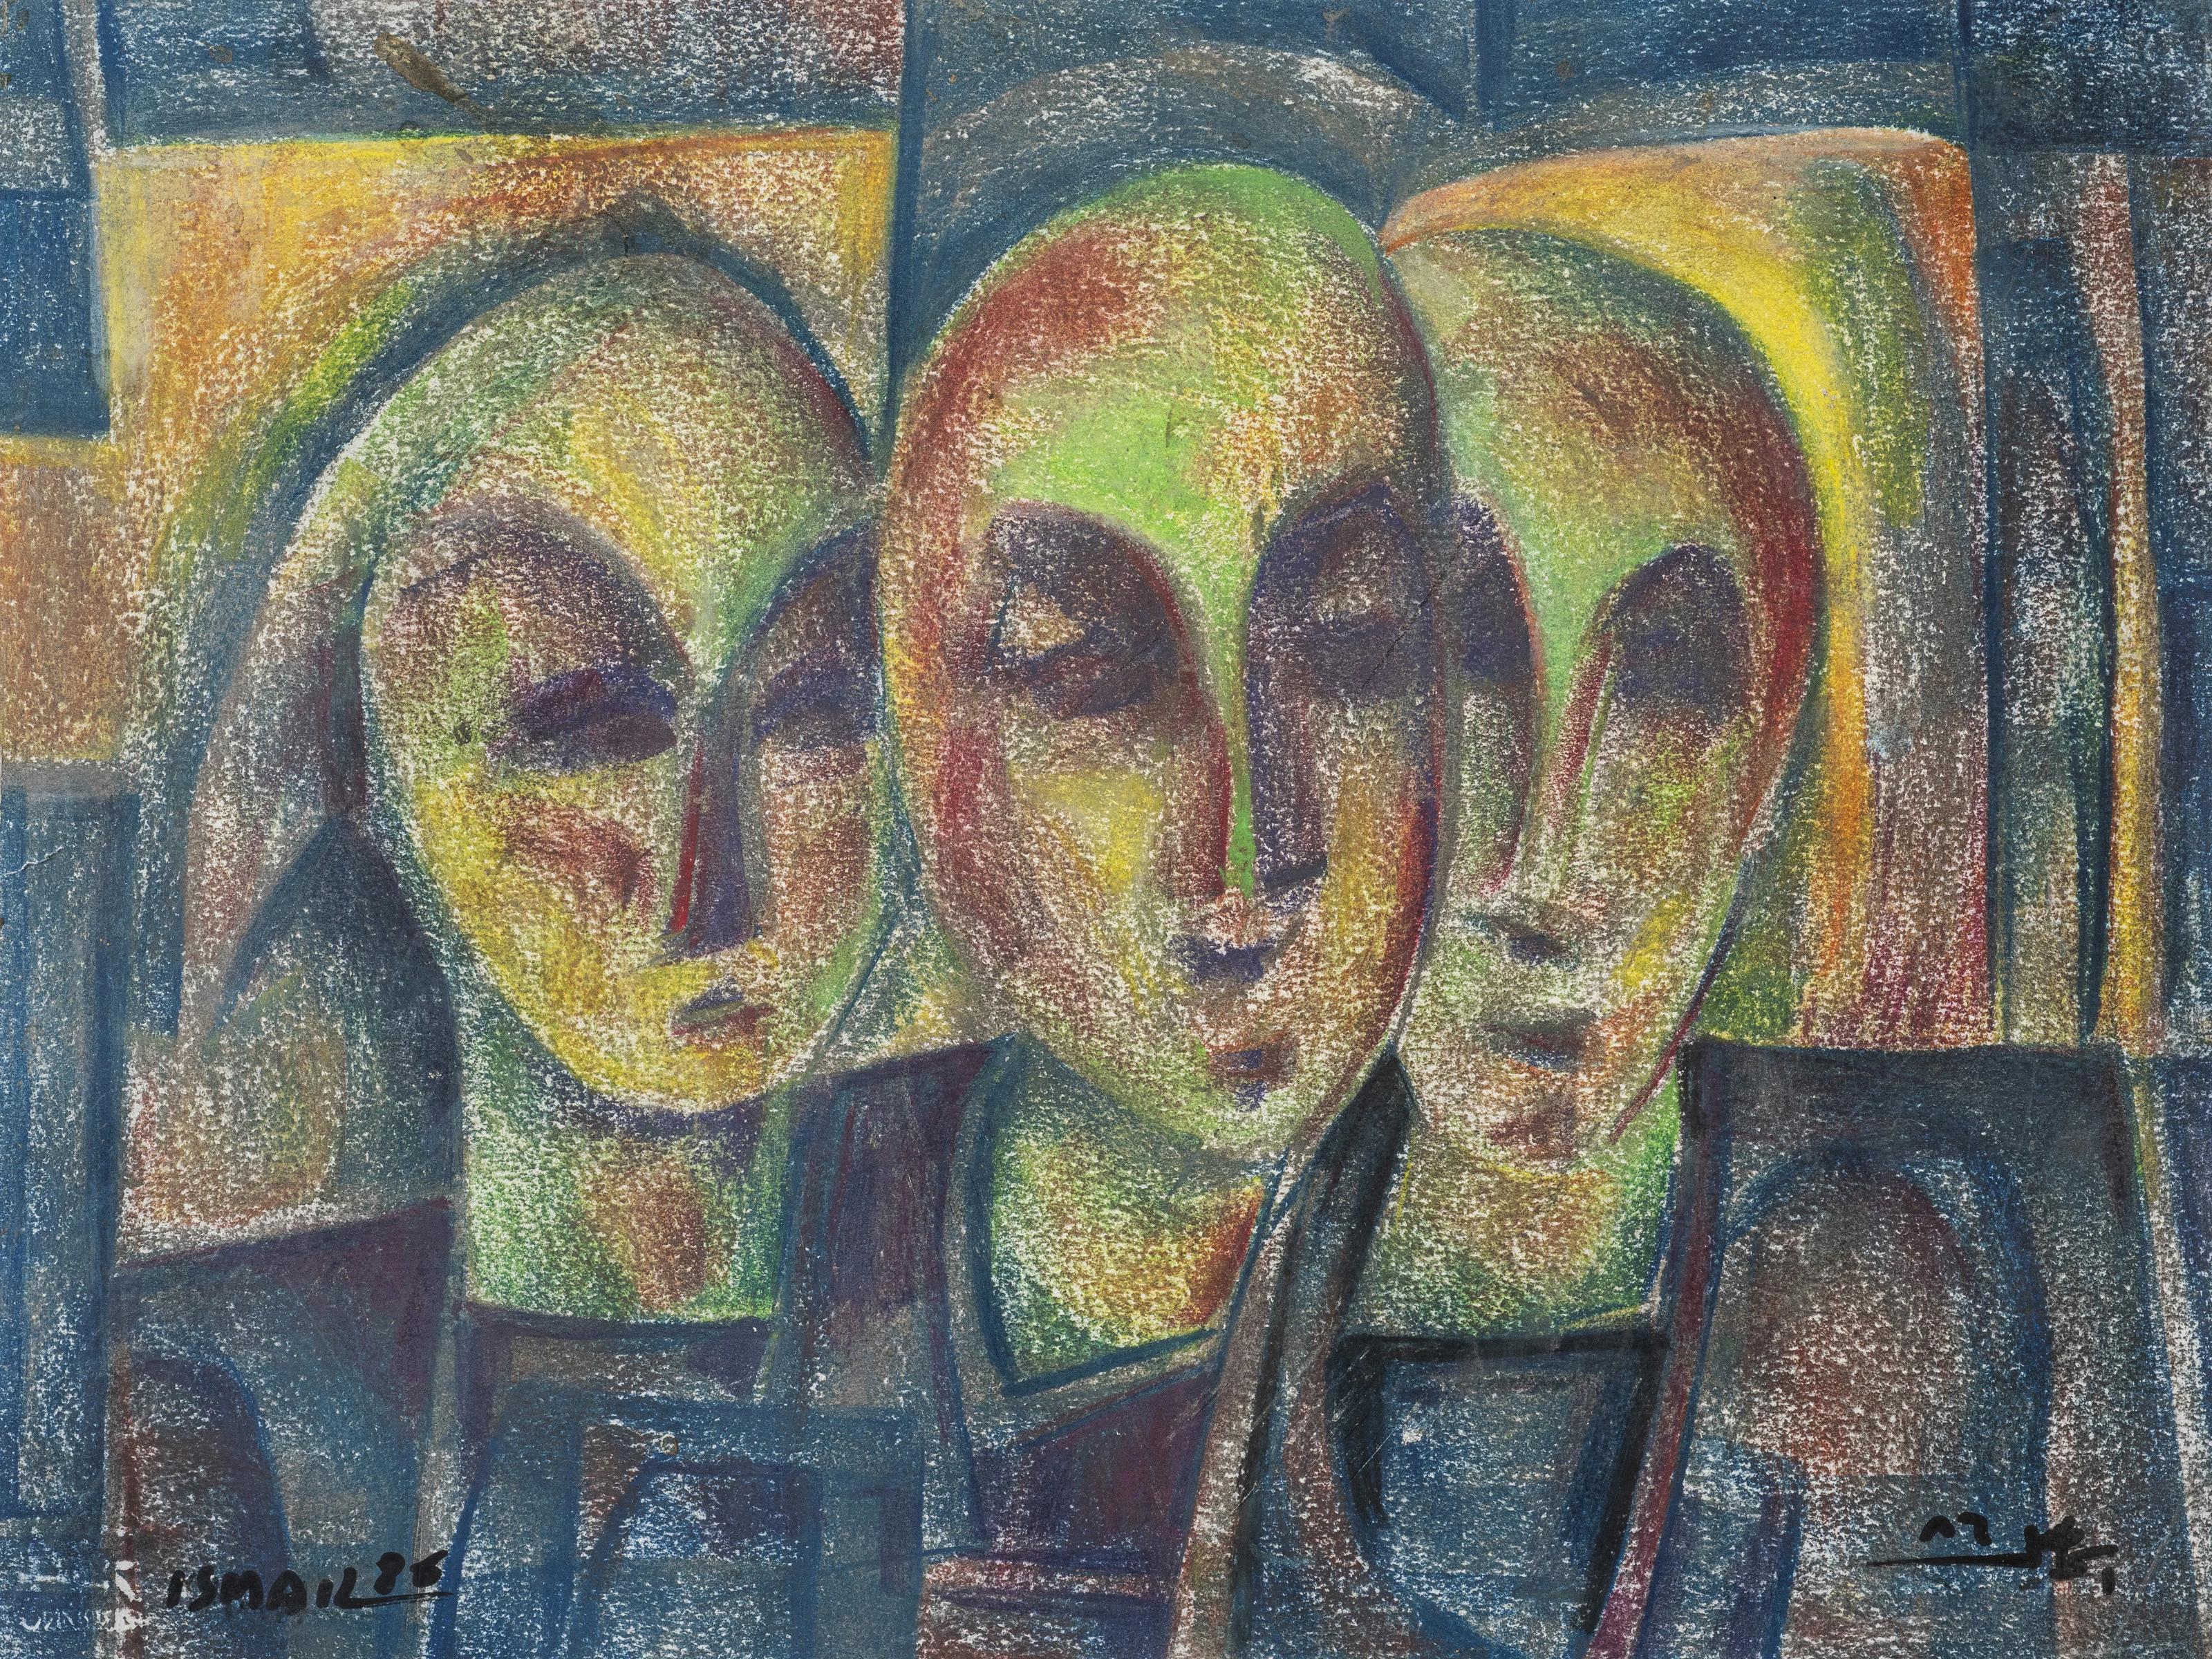 "Three Faces" Painting Pastel on Paper 12" x 18" inch by Mohammed Ismail 